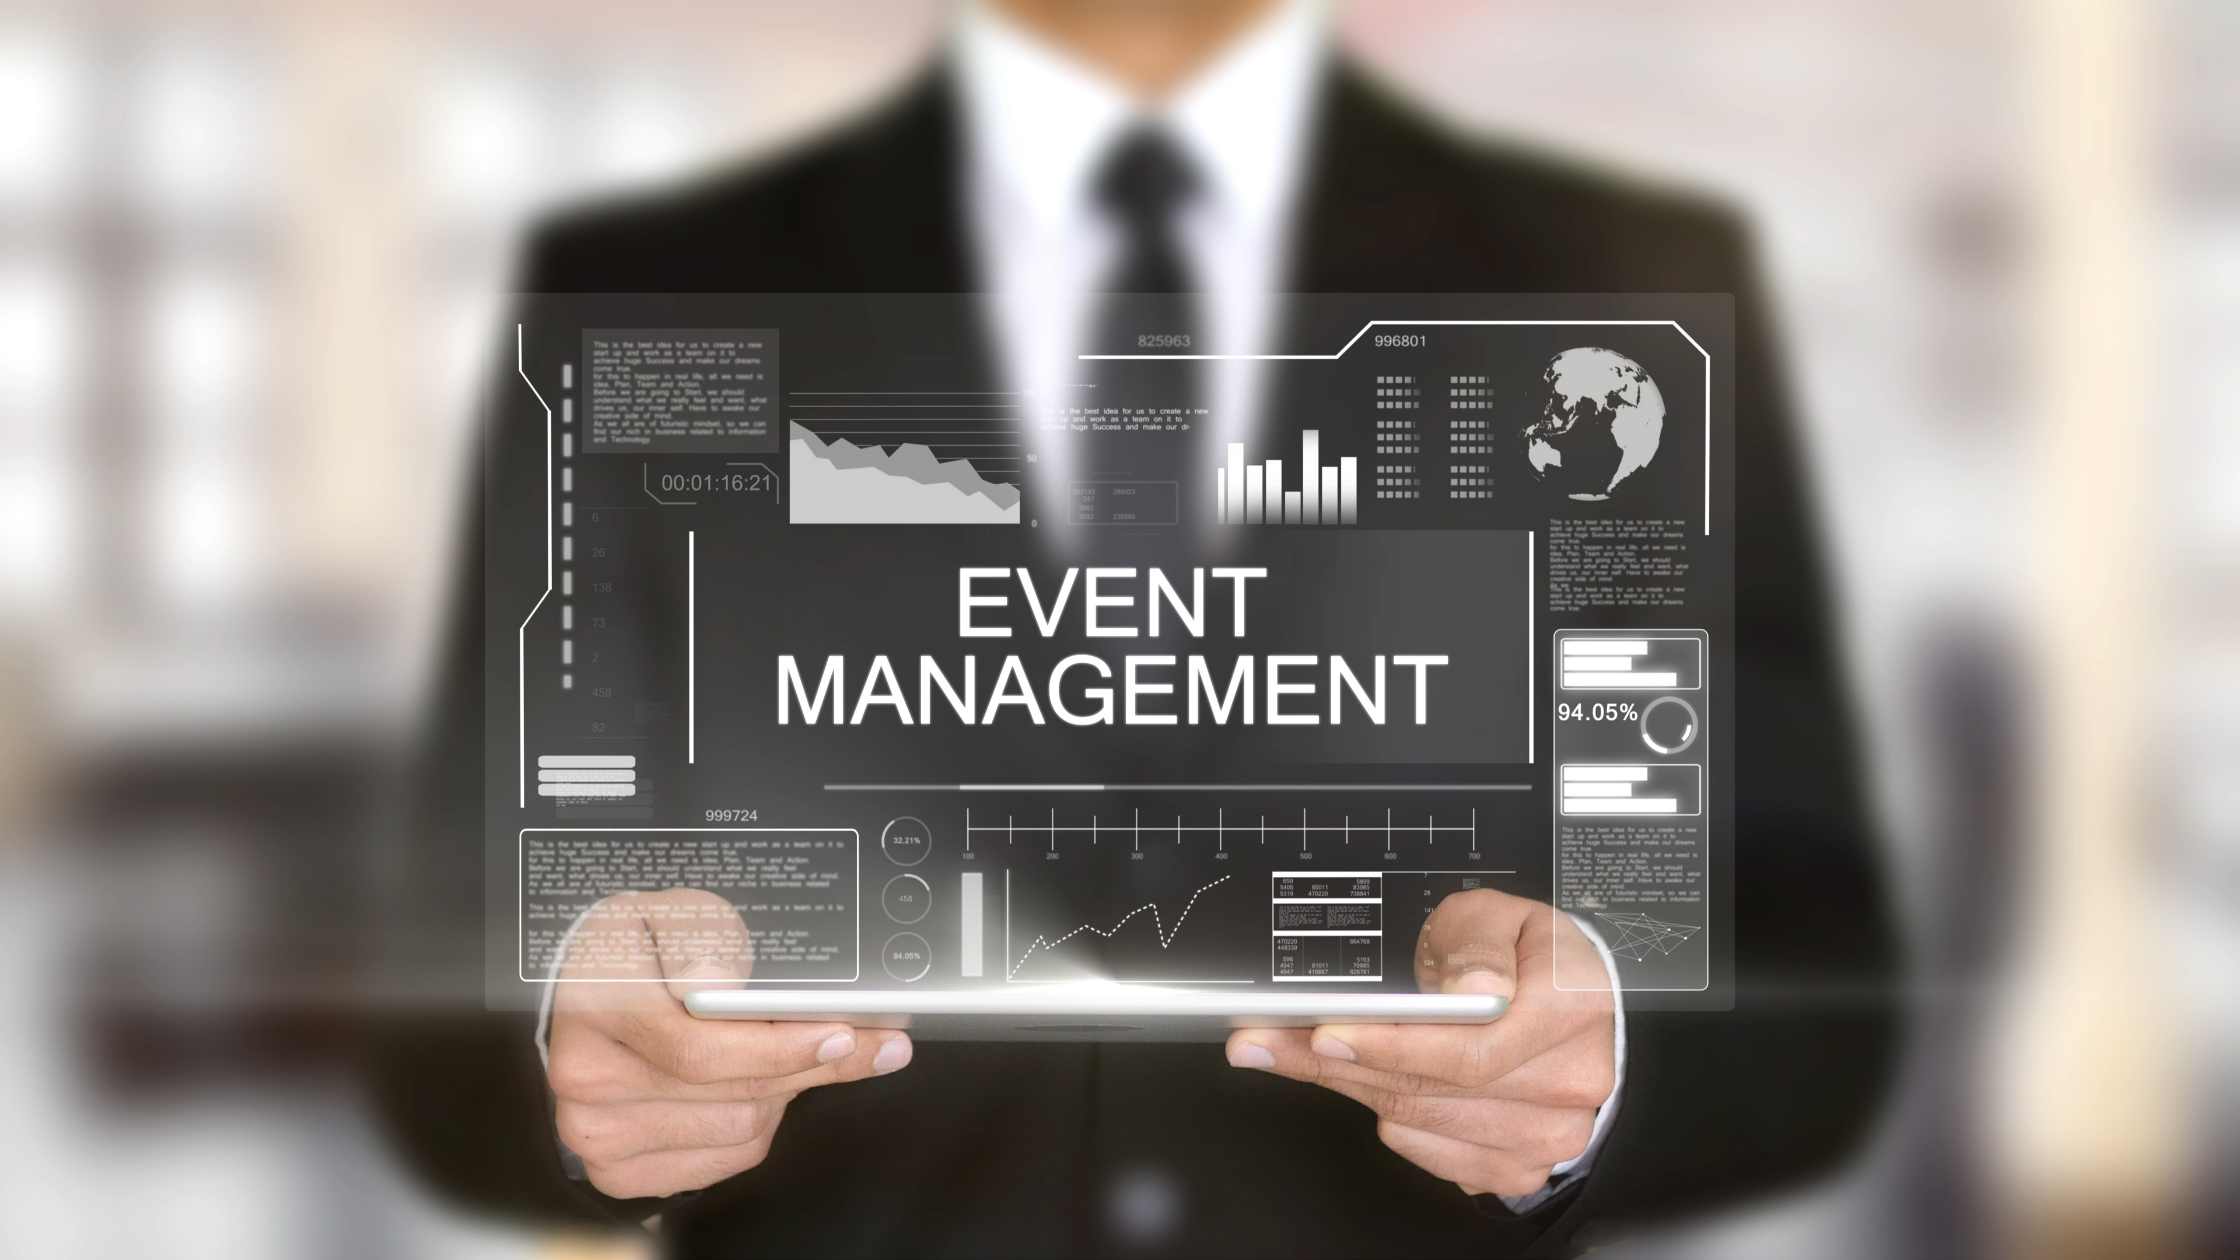 What is ITIL monitoring and event management